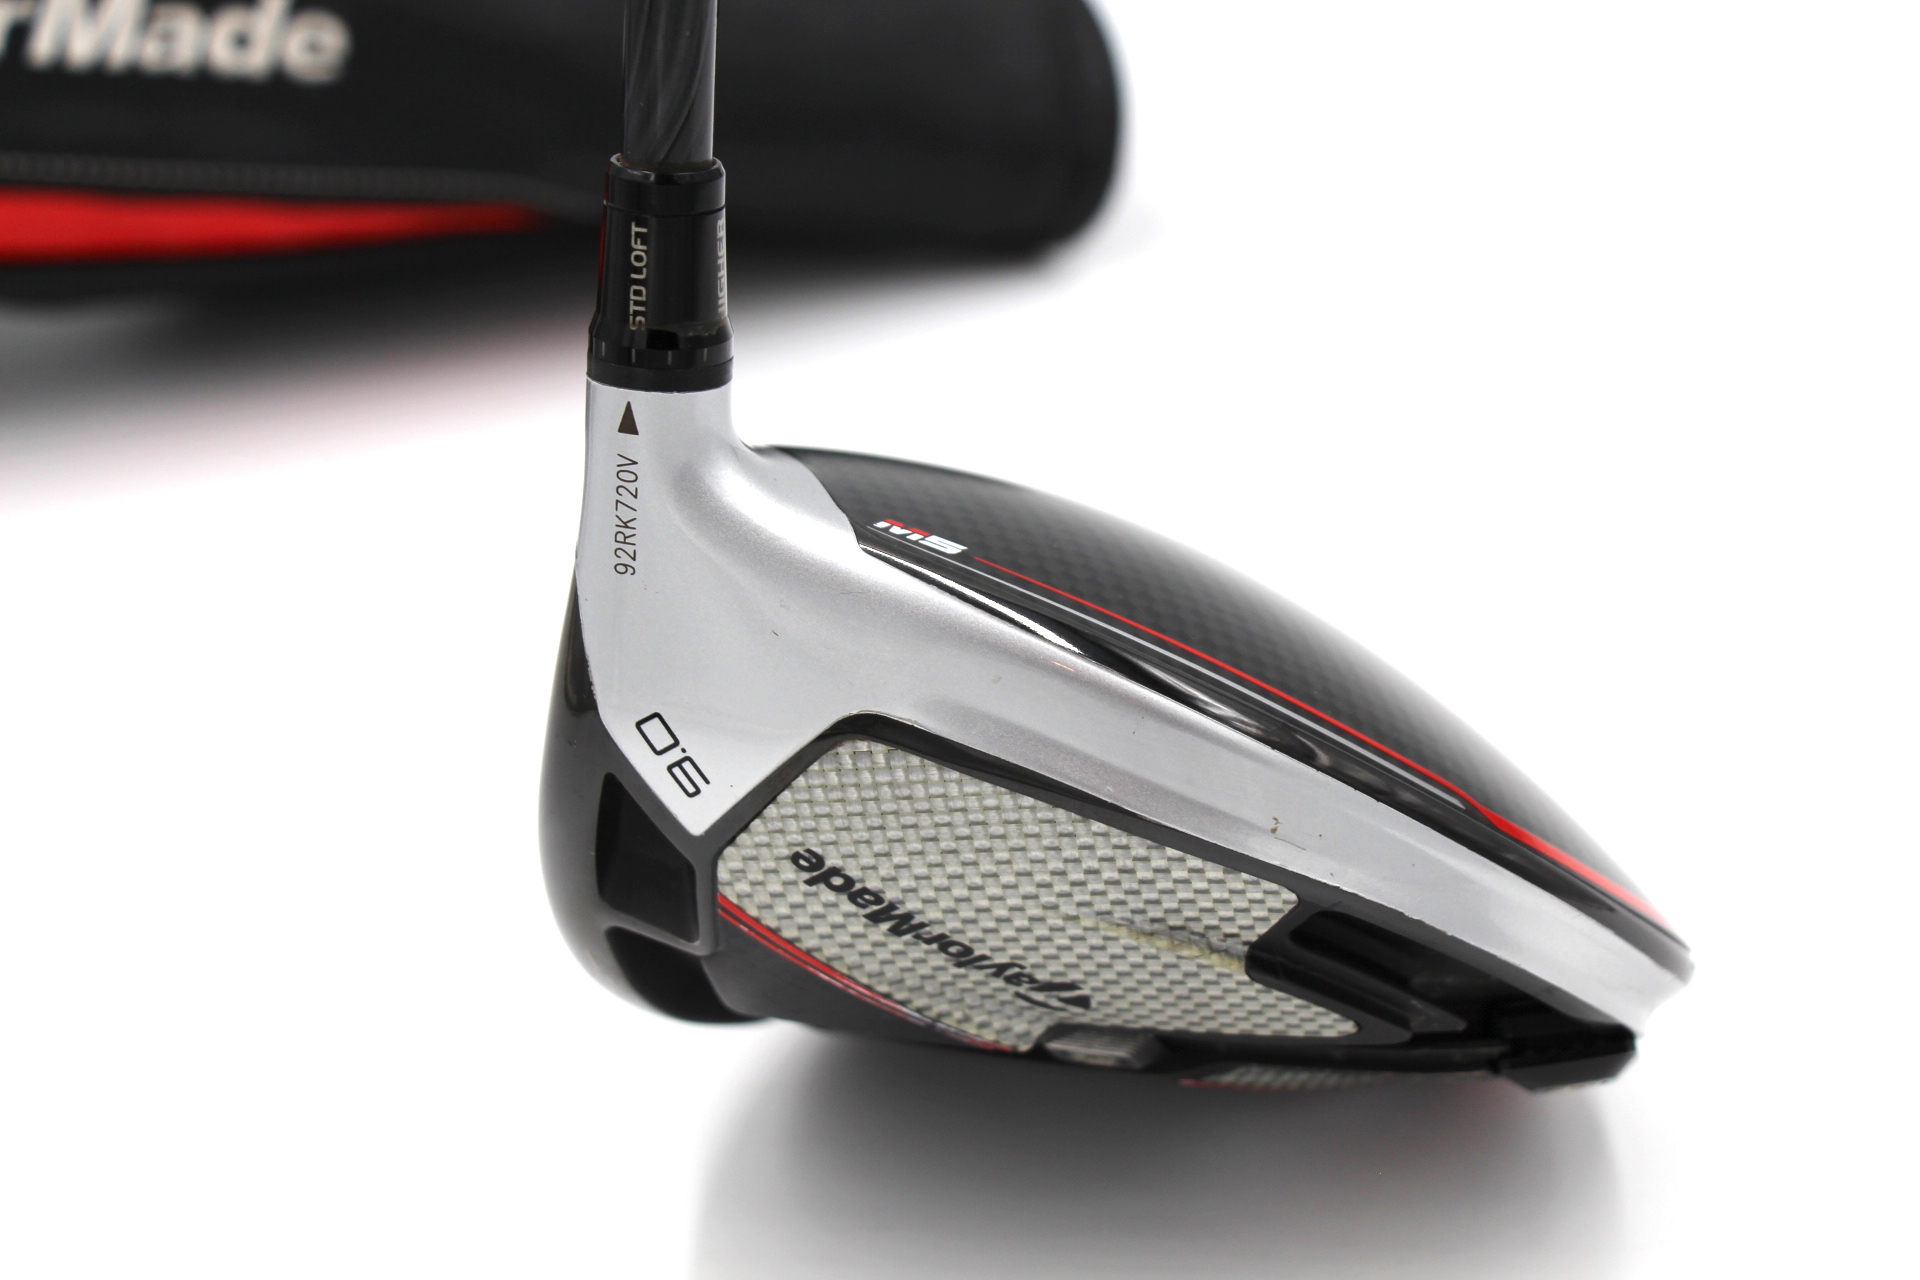 taylormade rbz driver tuning guide